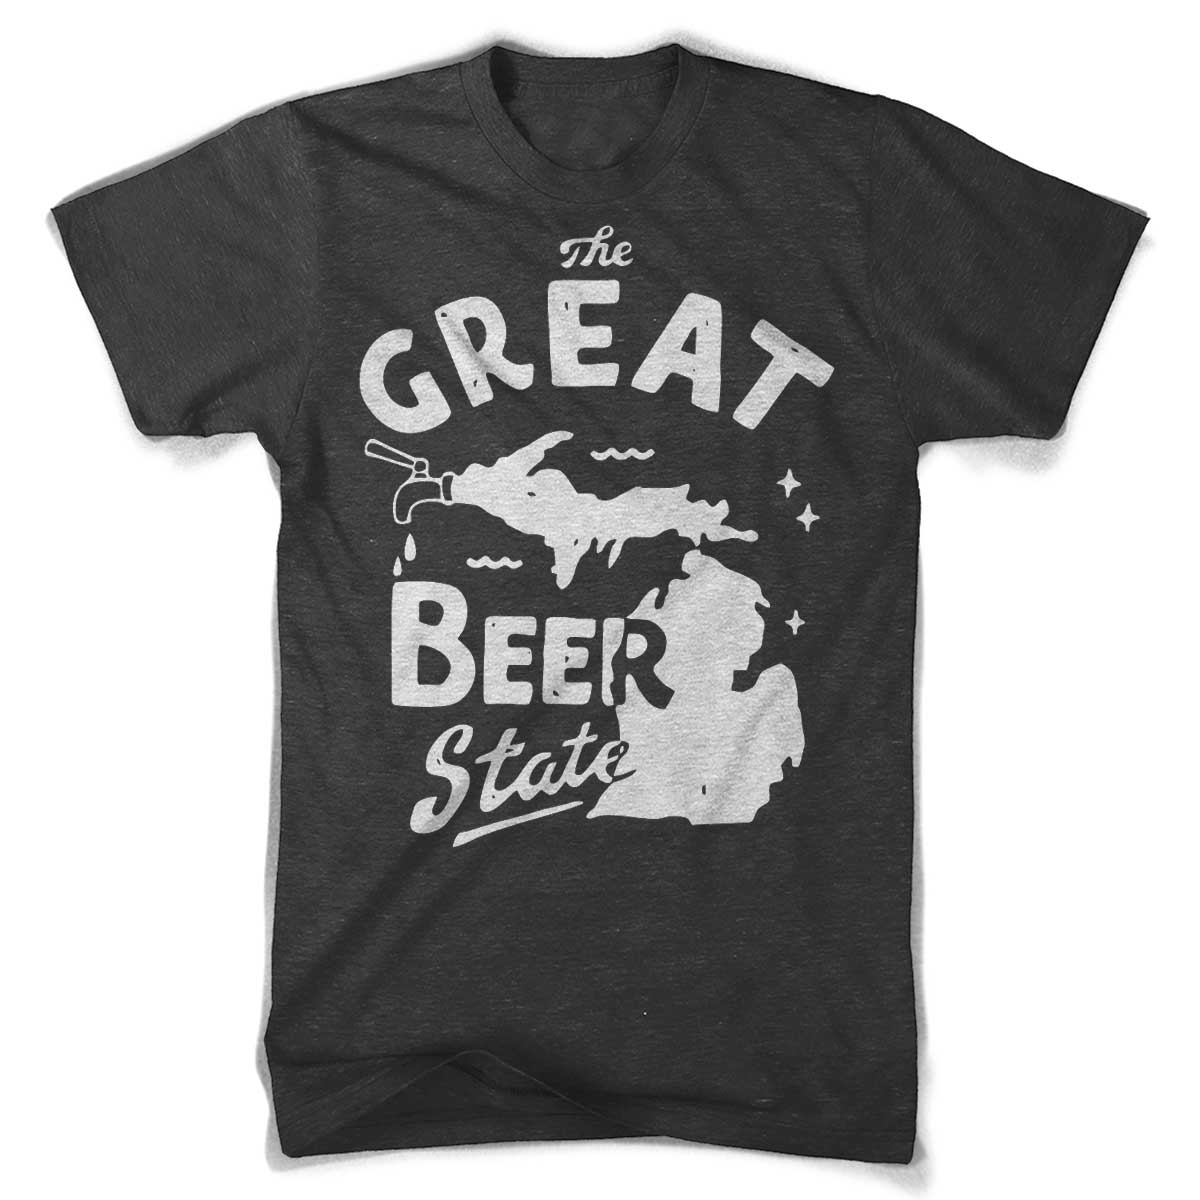 Mens Triblend The Great Beer State T-shirt (Heather Black)